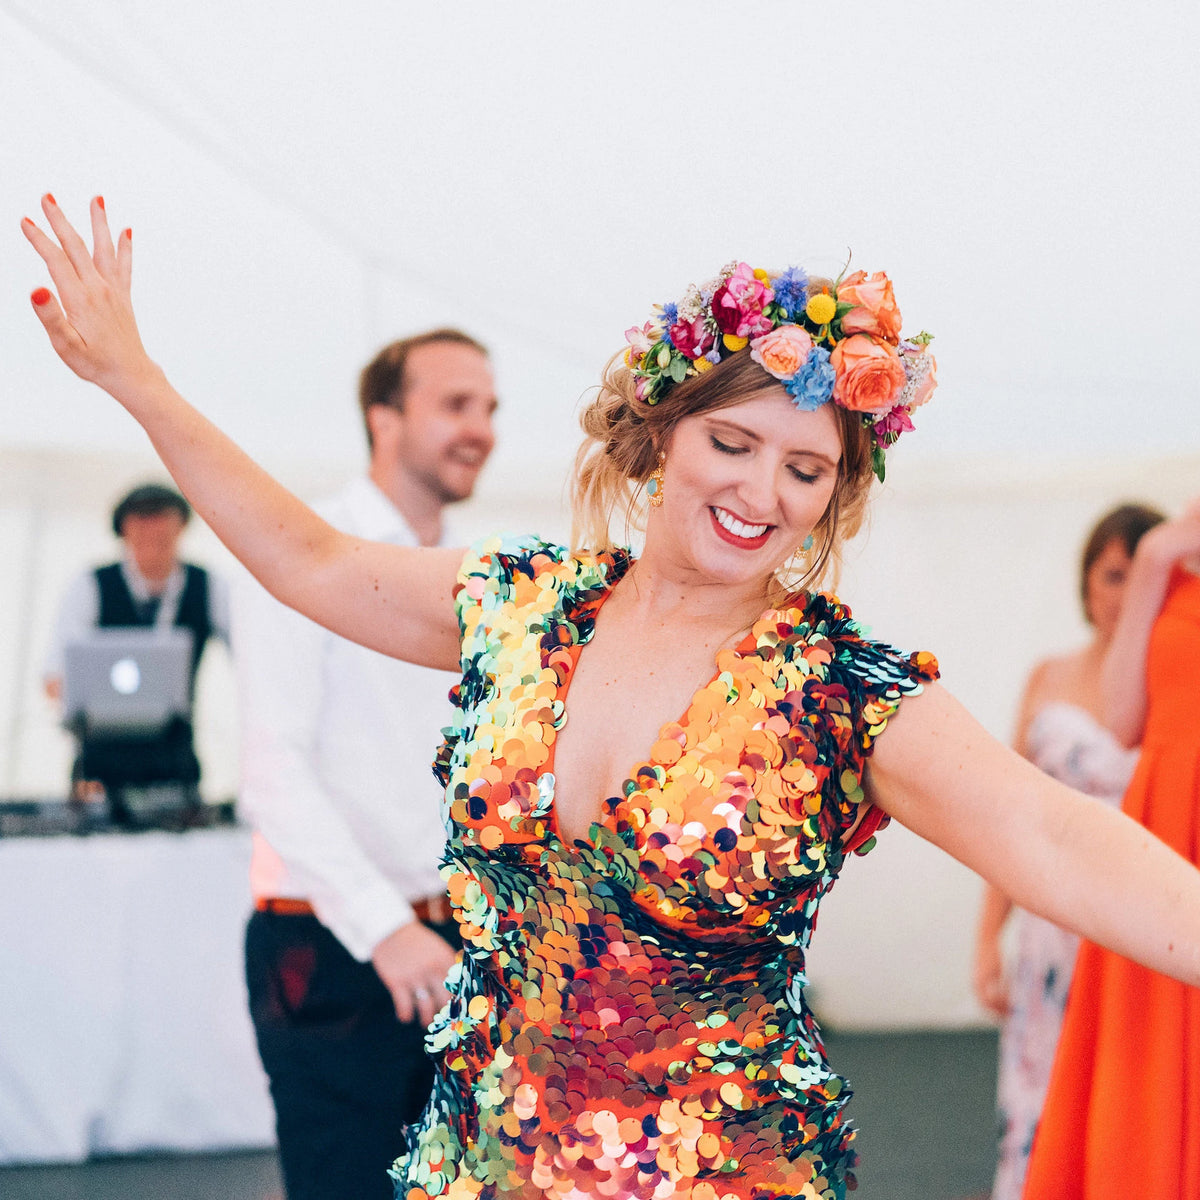 A bride with festival style flower crown and red sequin jumpsuit dances at her wedding